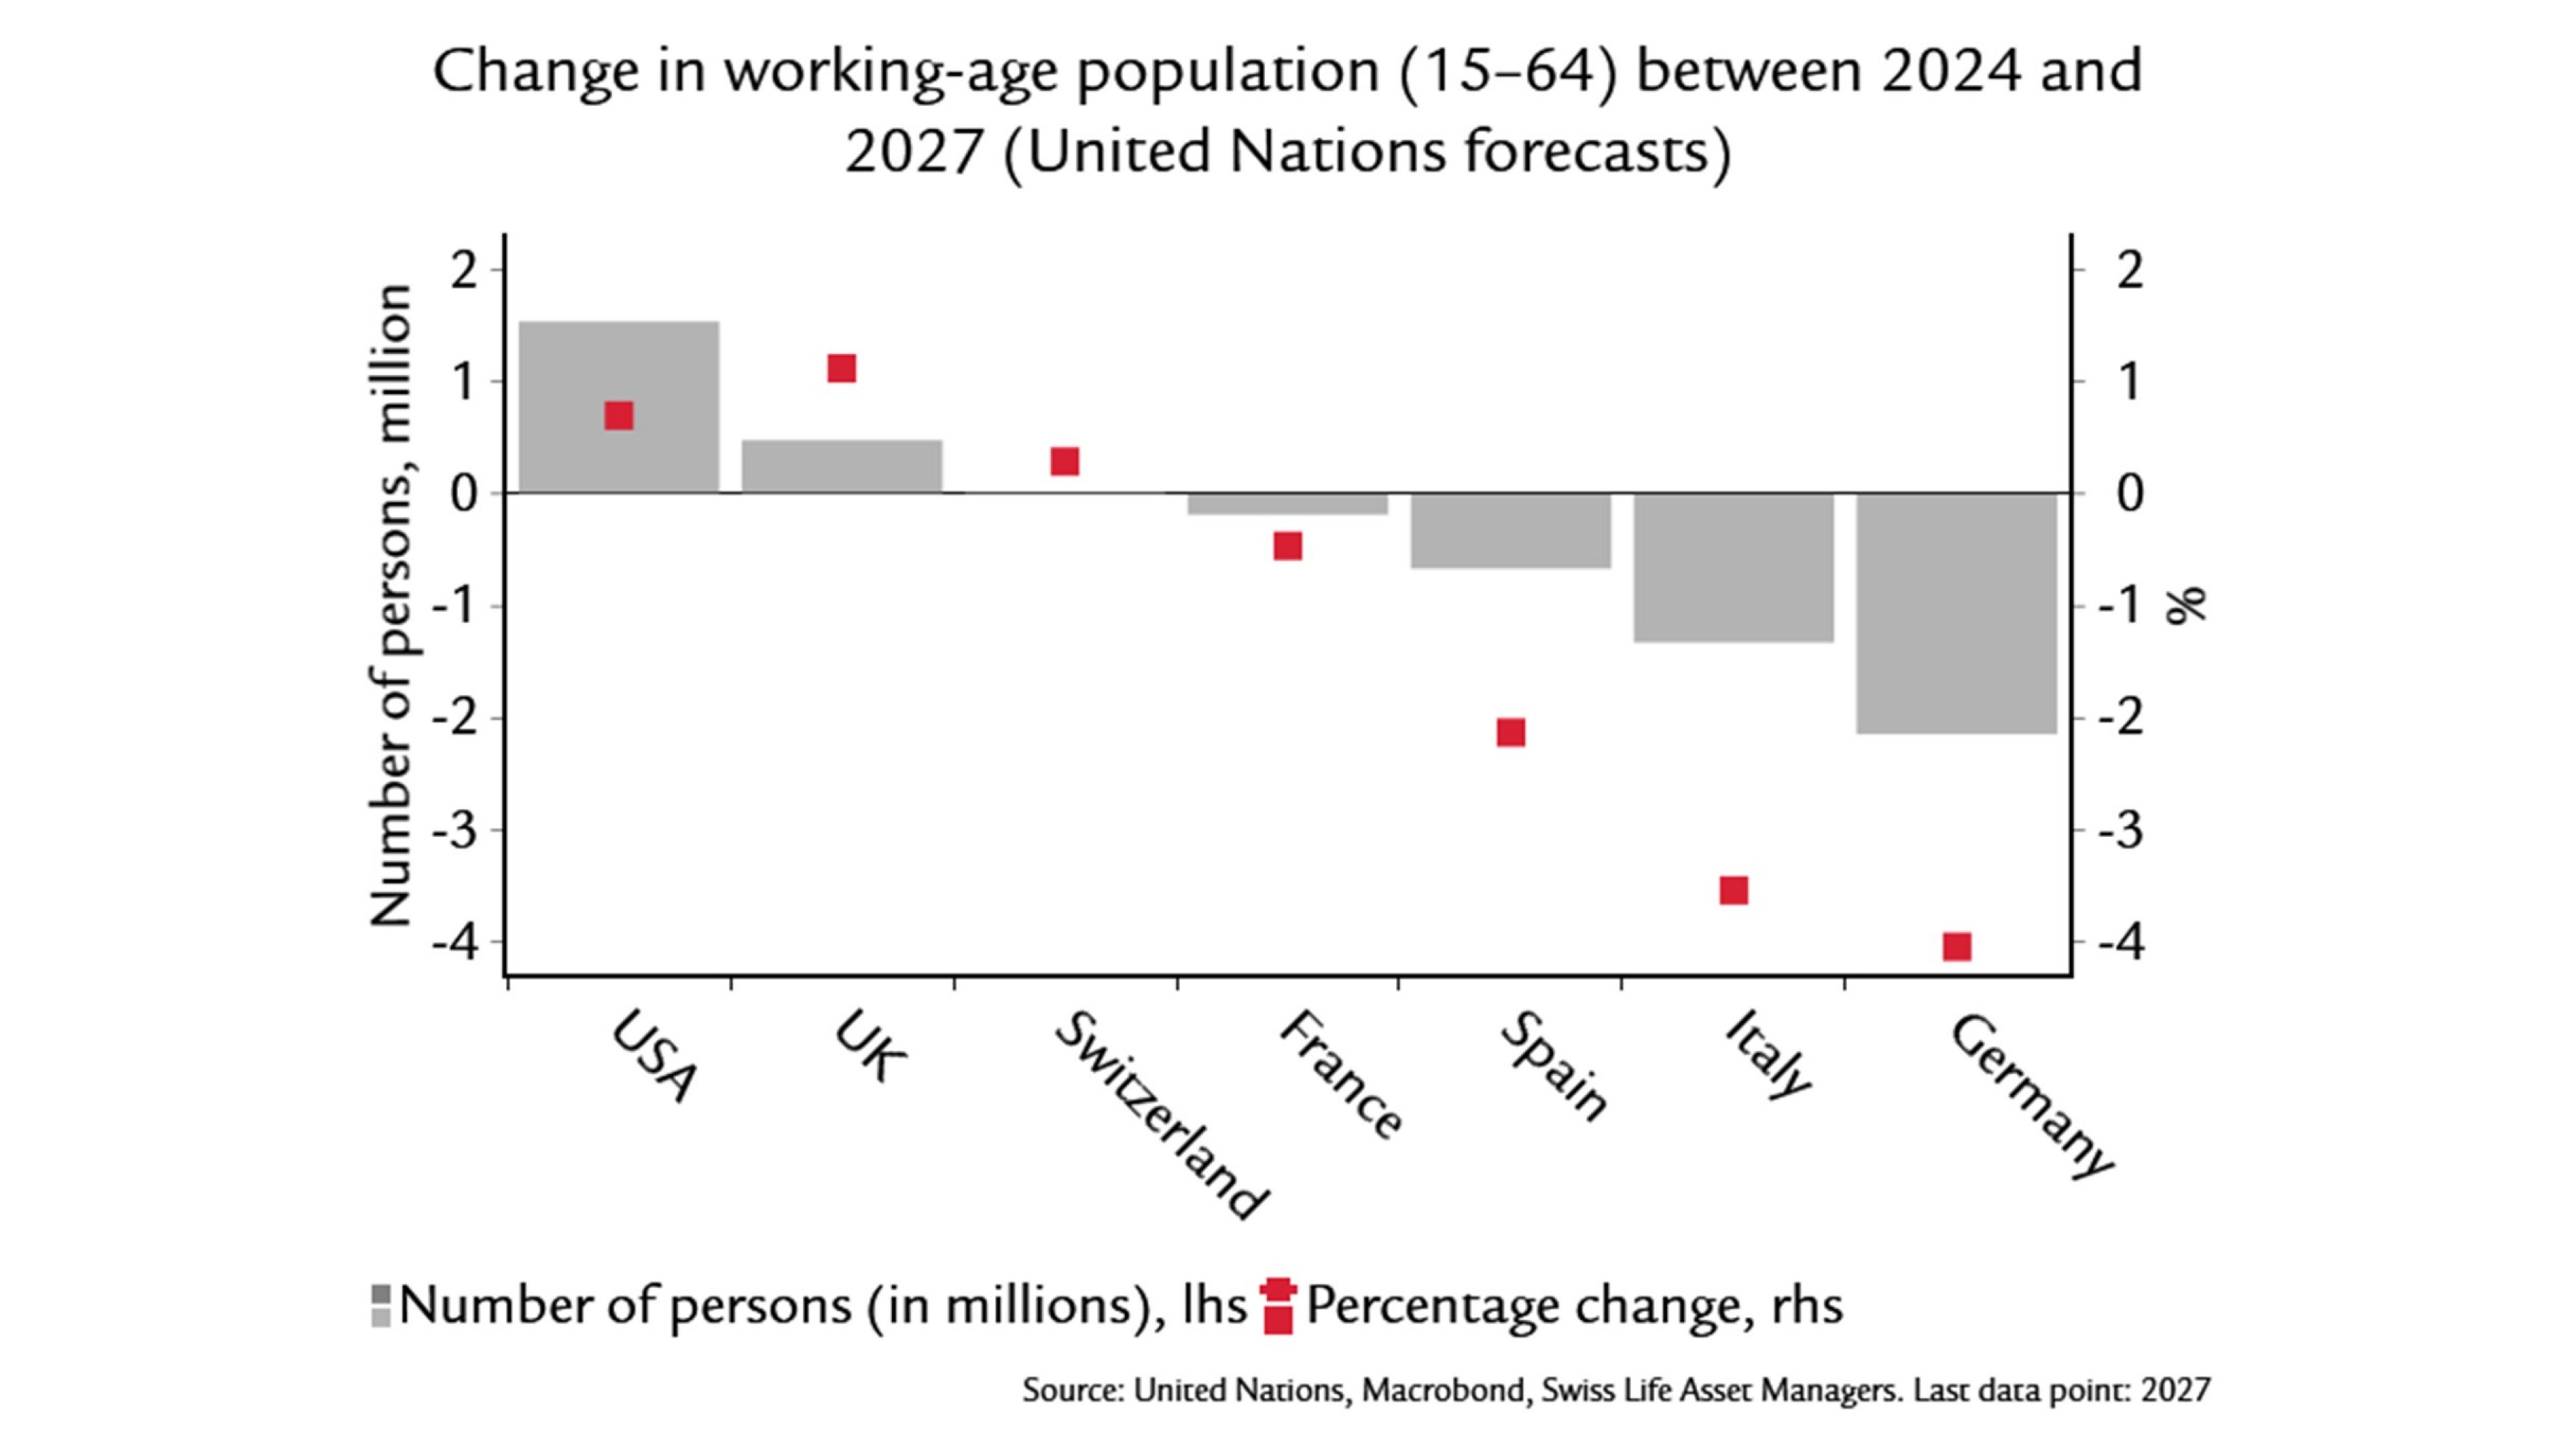 graphic shows change in working-age population (15-64) between 2024 and 2027 (United Nations forecasts)